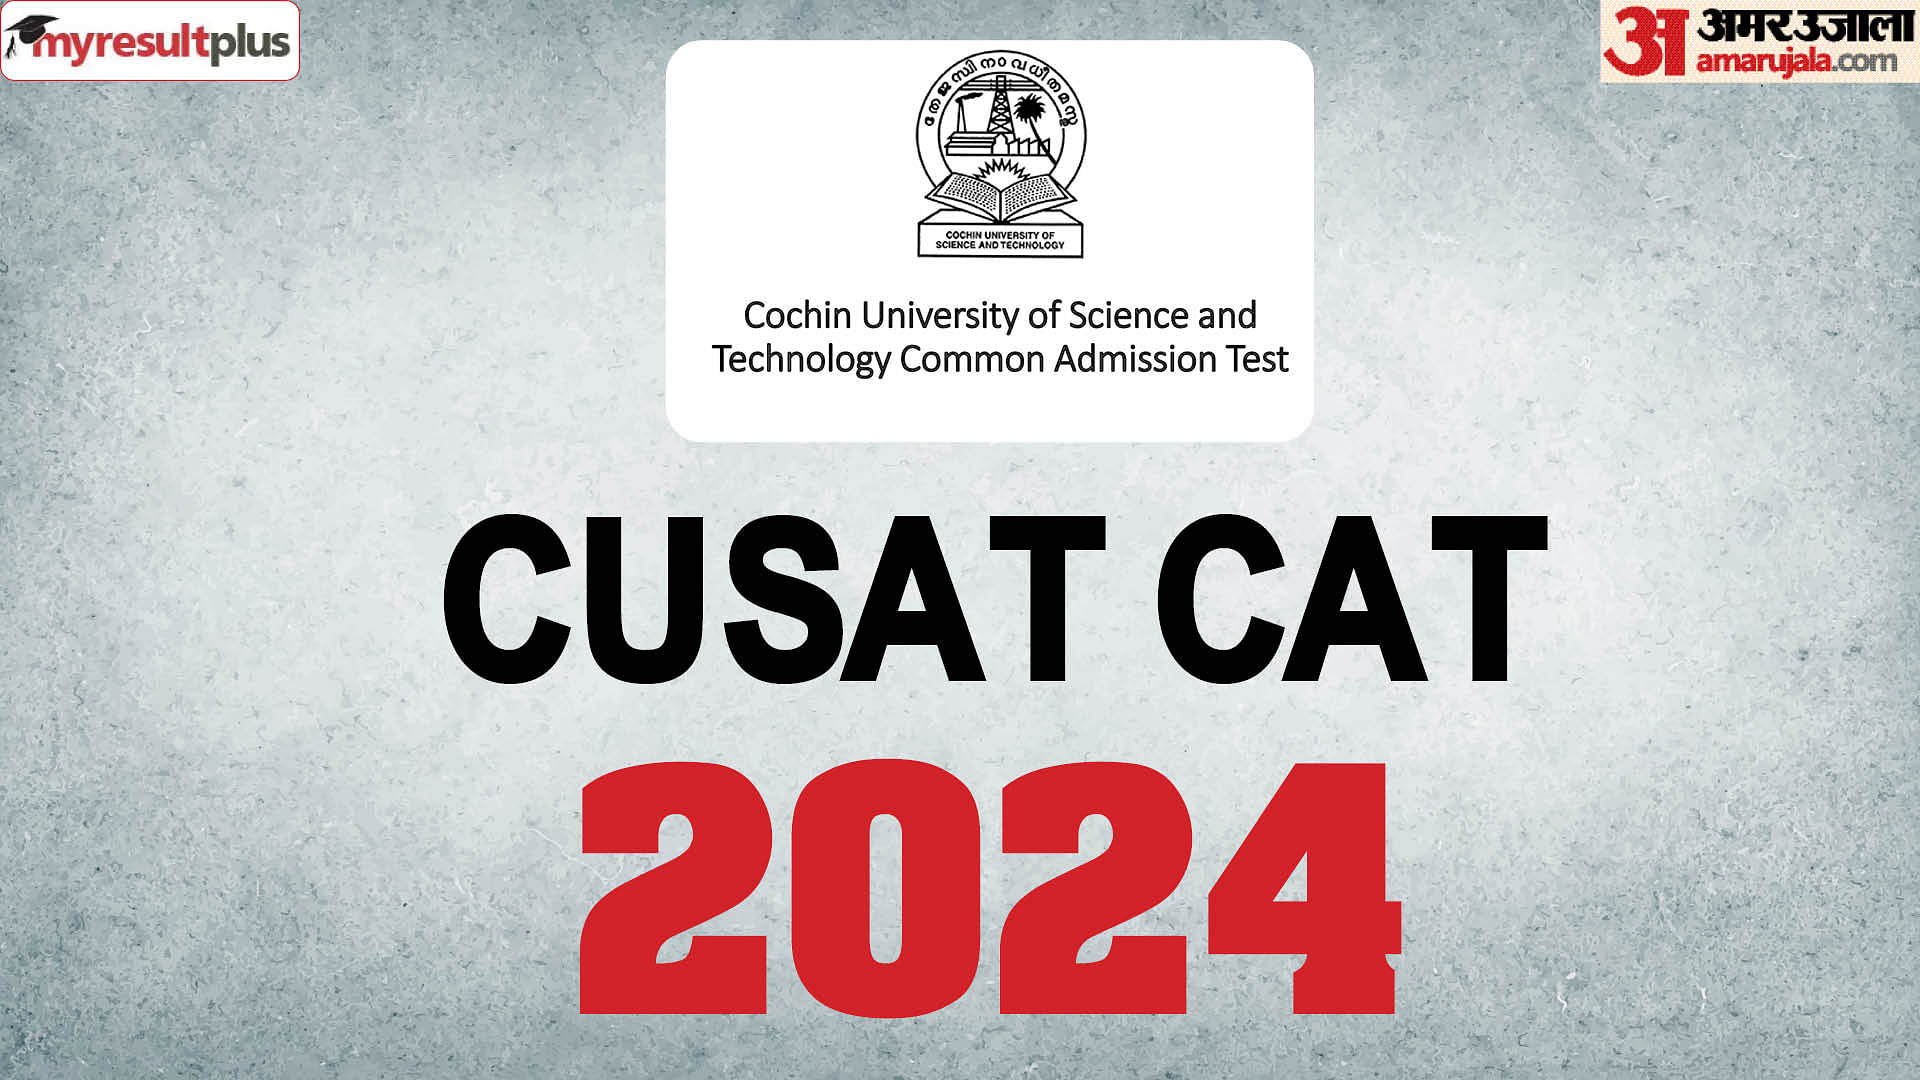 CUSAT CAT 2024 Result declared, Check the name of toppers and steps to check result here